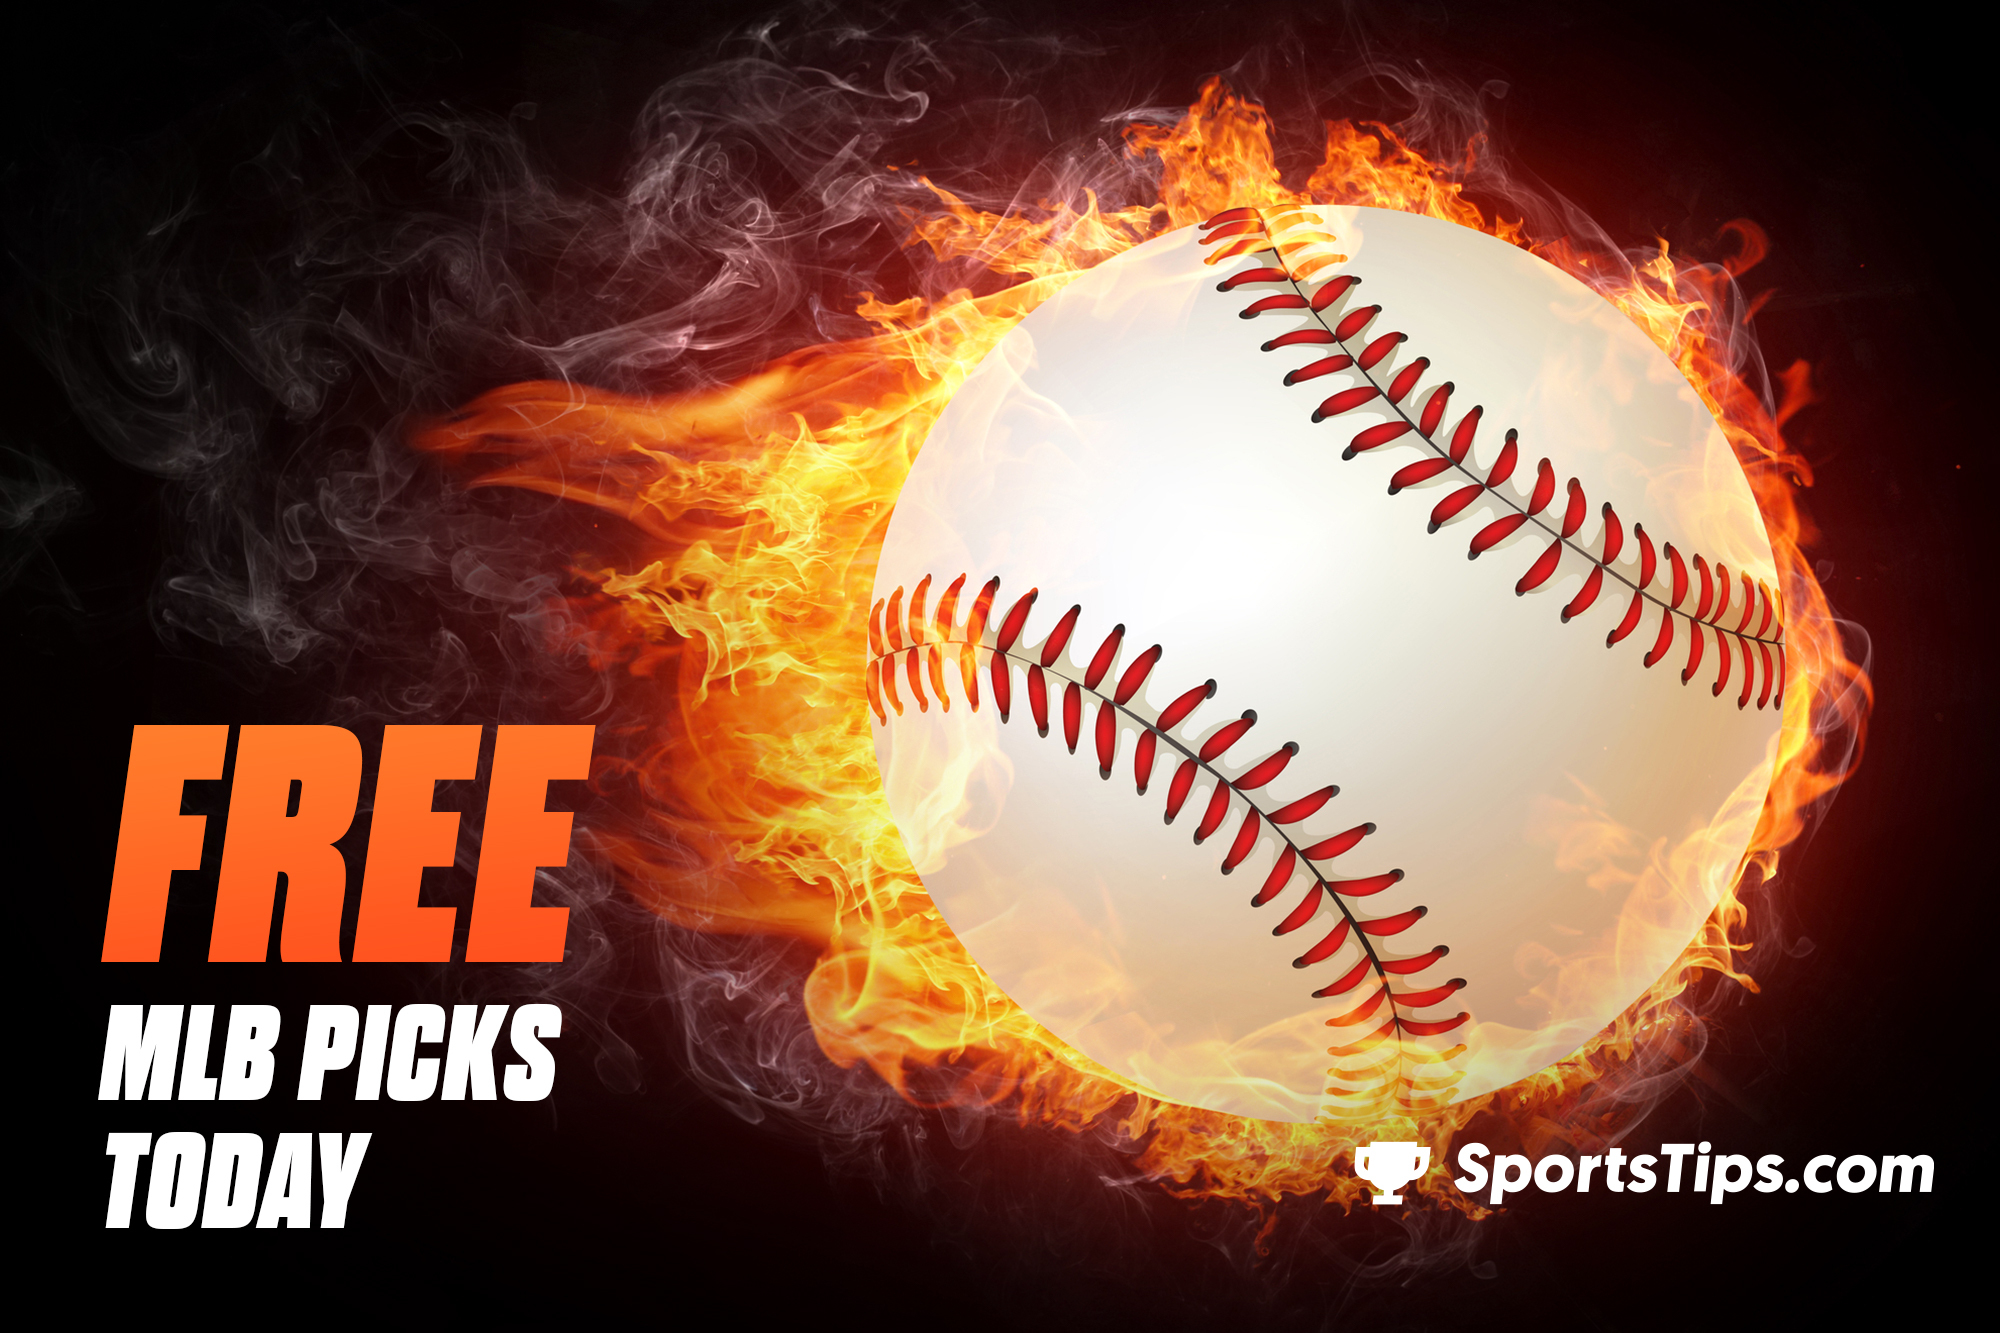 Free MLB Picks Today for Monday, August 23rd, 2021